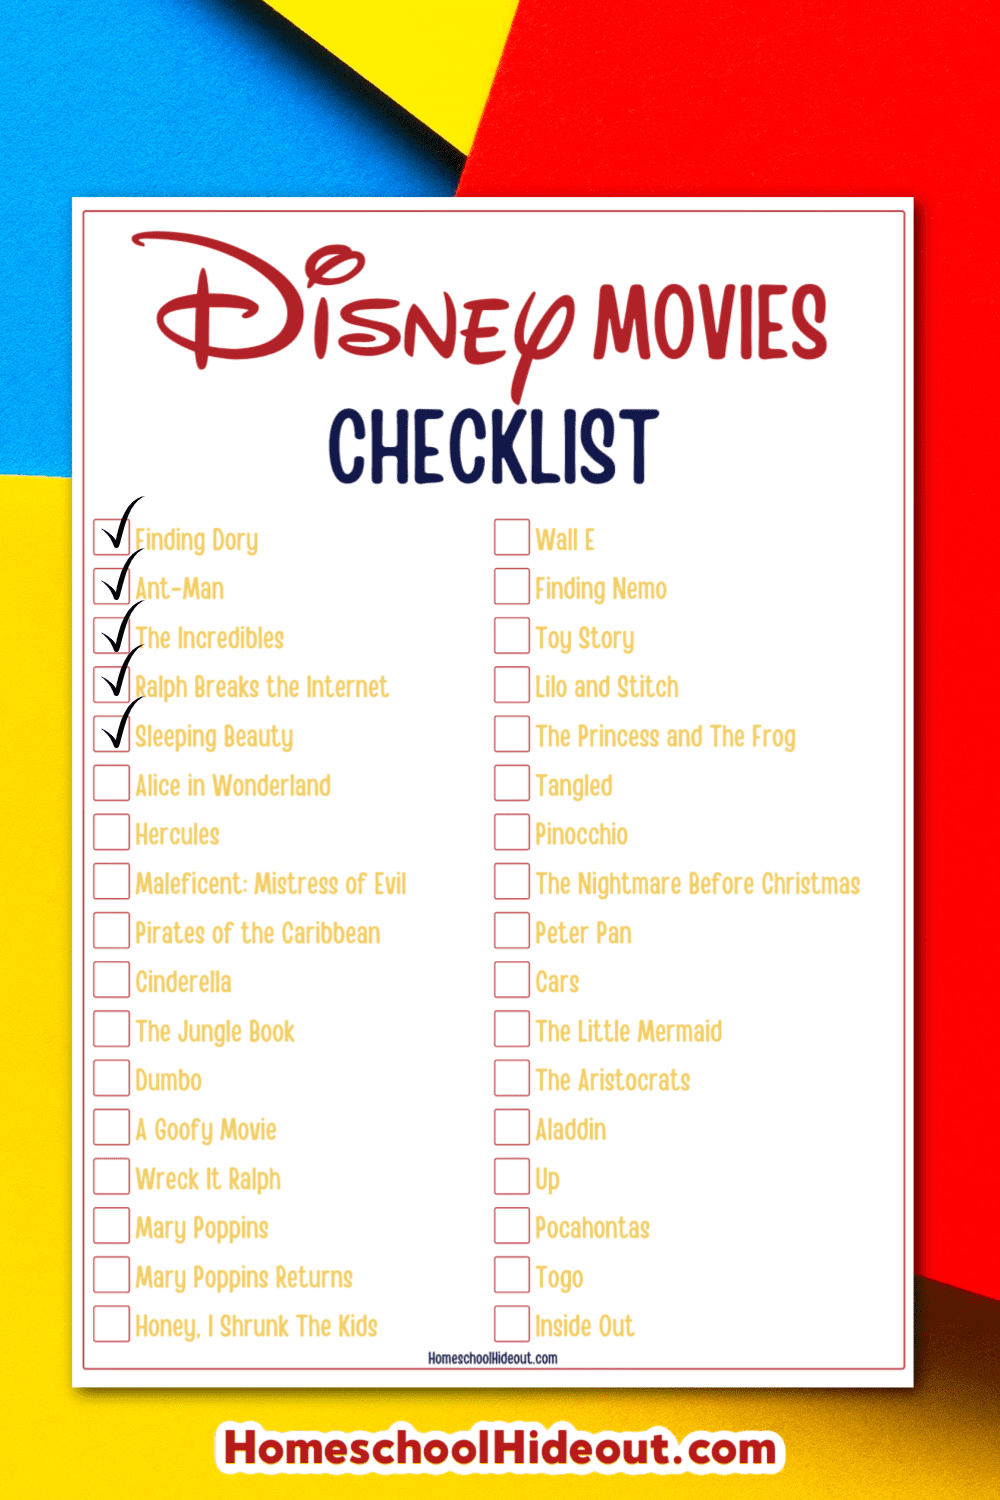 These are THE best movies on Disney Plus right now and I'm determined to watch every single one of them!